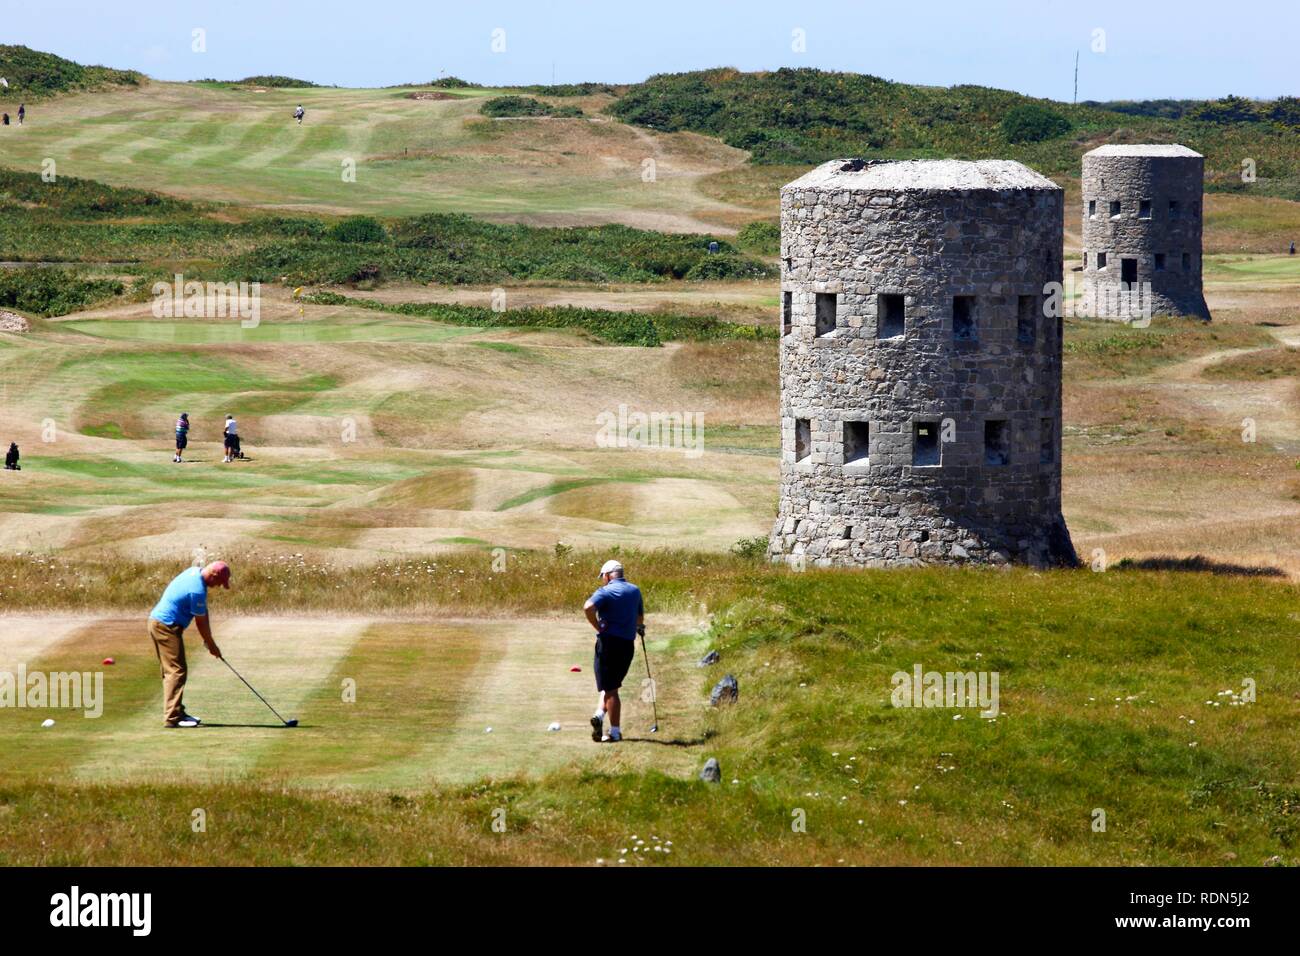 Royal Guernsey Golf Club, Martello towers, watch towers and fortified towers built in the 17th century, next to the fairways, at Stock Photo